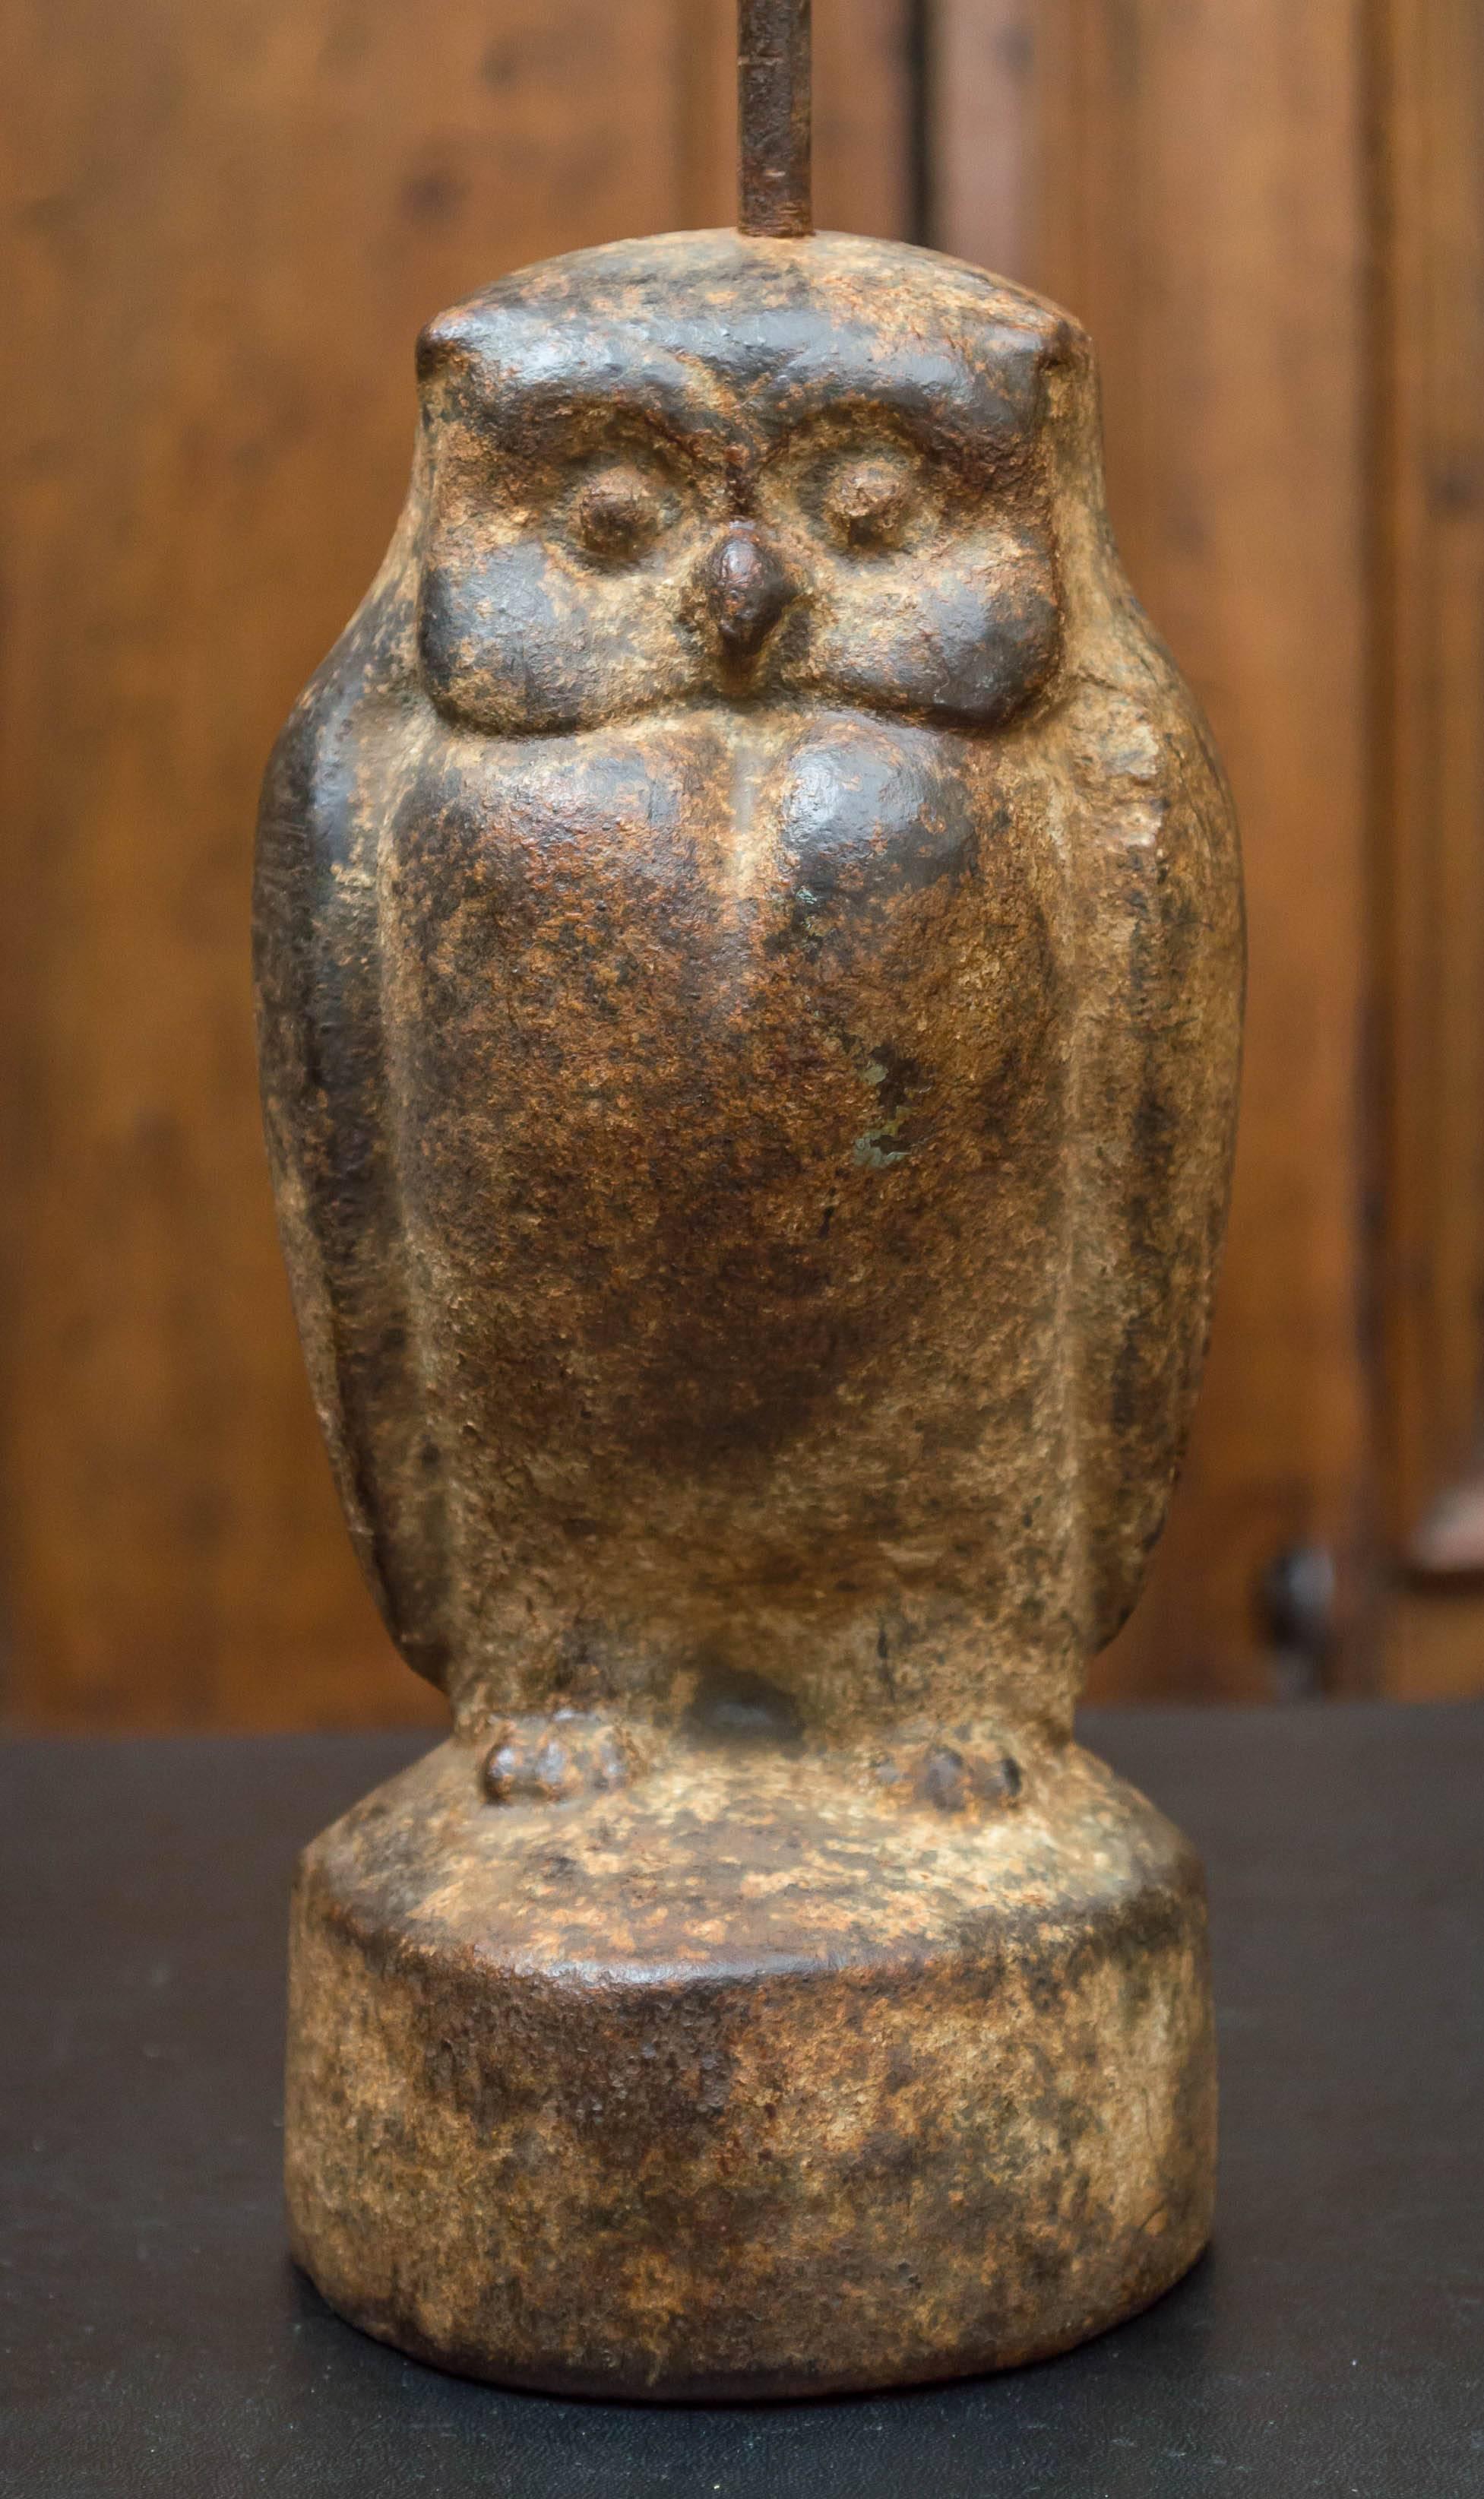 Late 19th century cast iron owl door stop with a brass knobbed standard / handle.
Old cement fill for extra weight. American. Great unrestored patina and heavy weight.